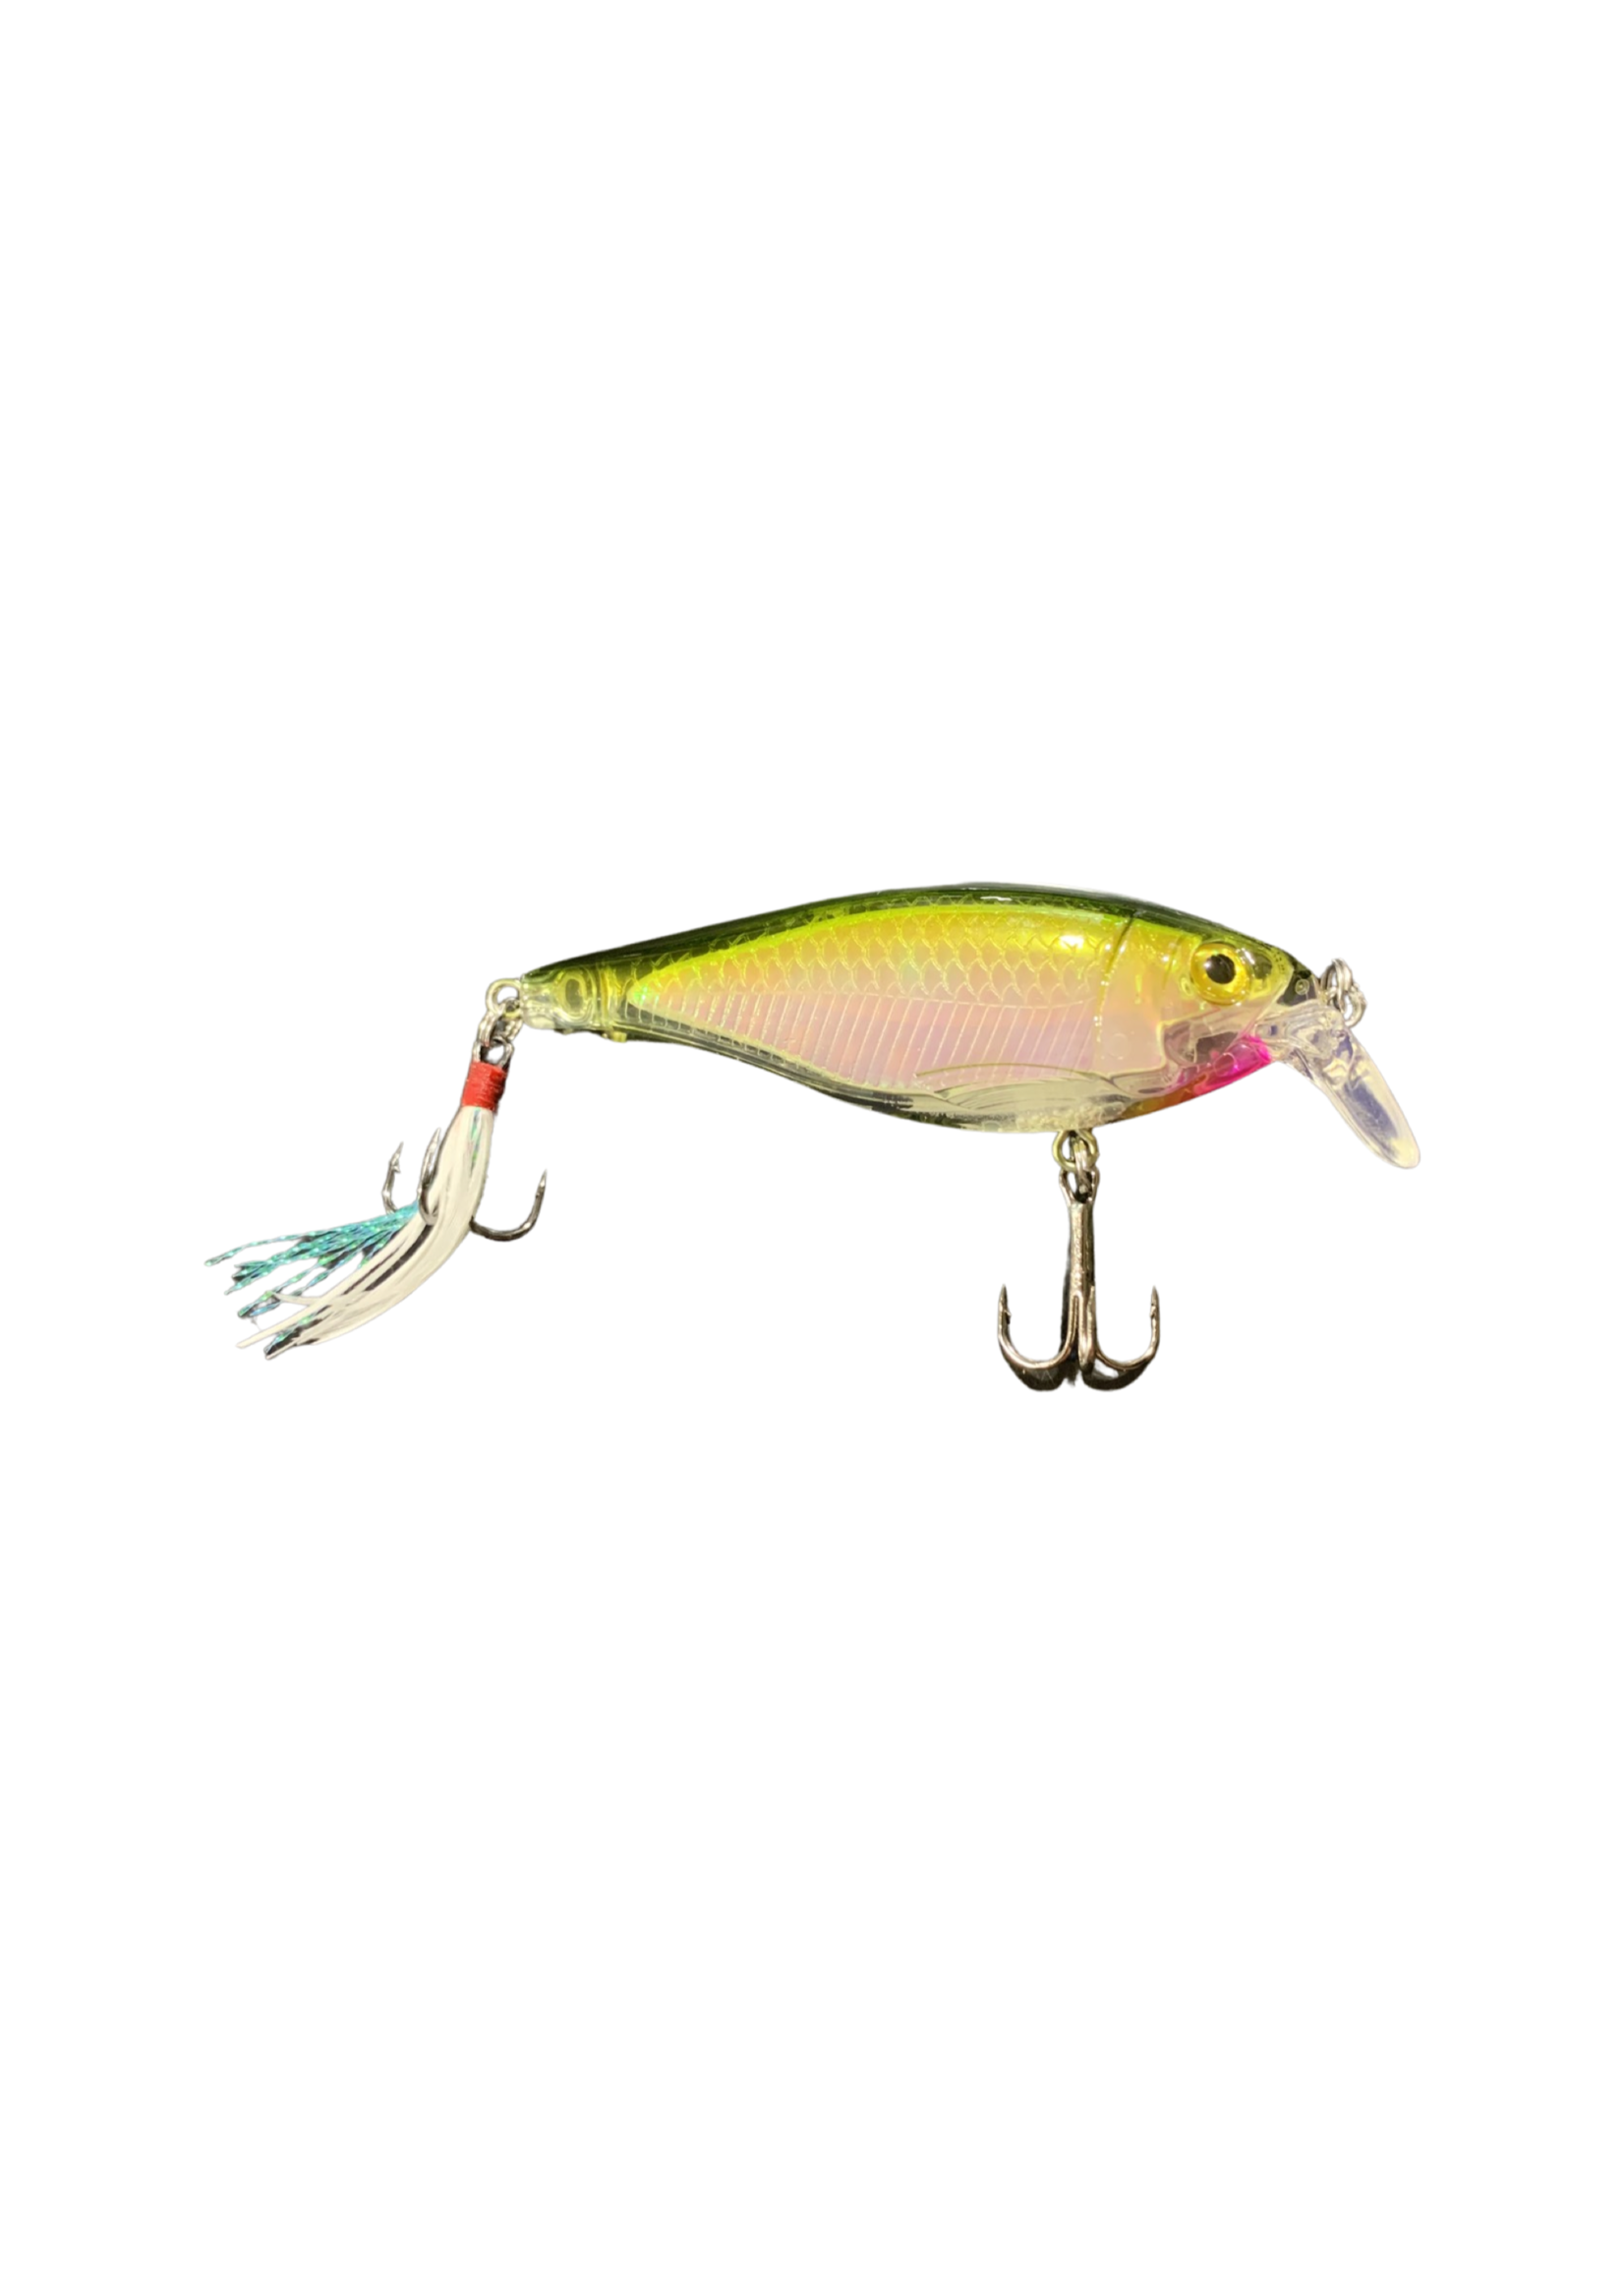 Catch em Big Lures Catch em Big Lures Feathered Jerkbait Walleye Rattlers Series